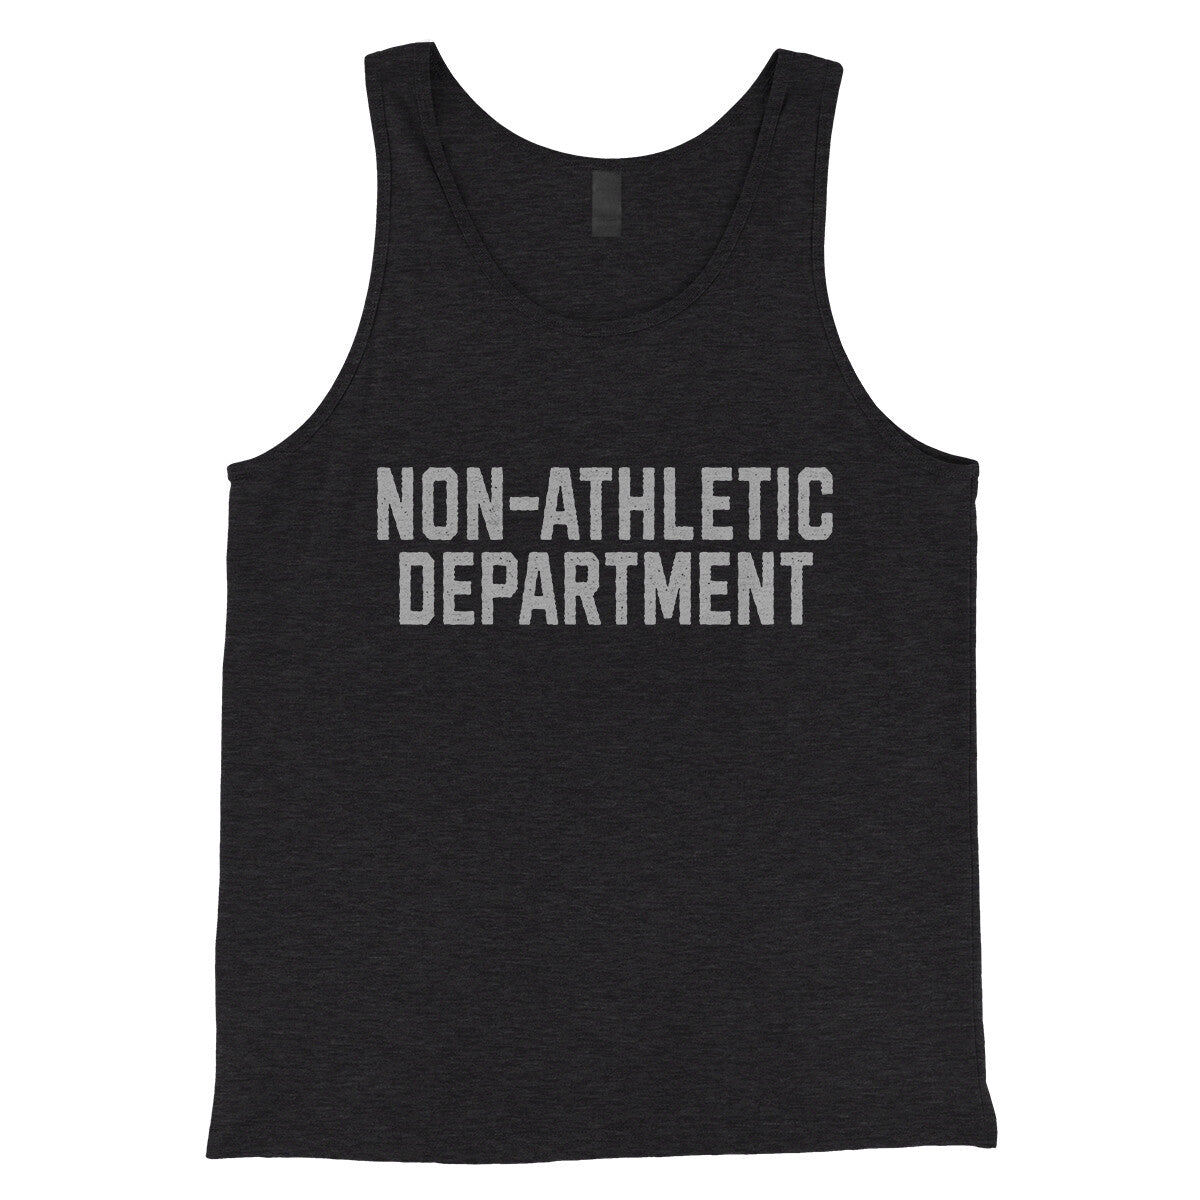 Non-Athletic Department in Charcoal Black TriBlend Color